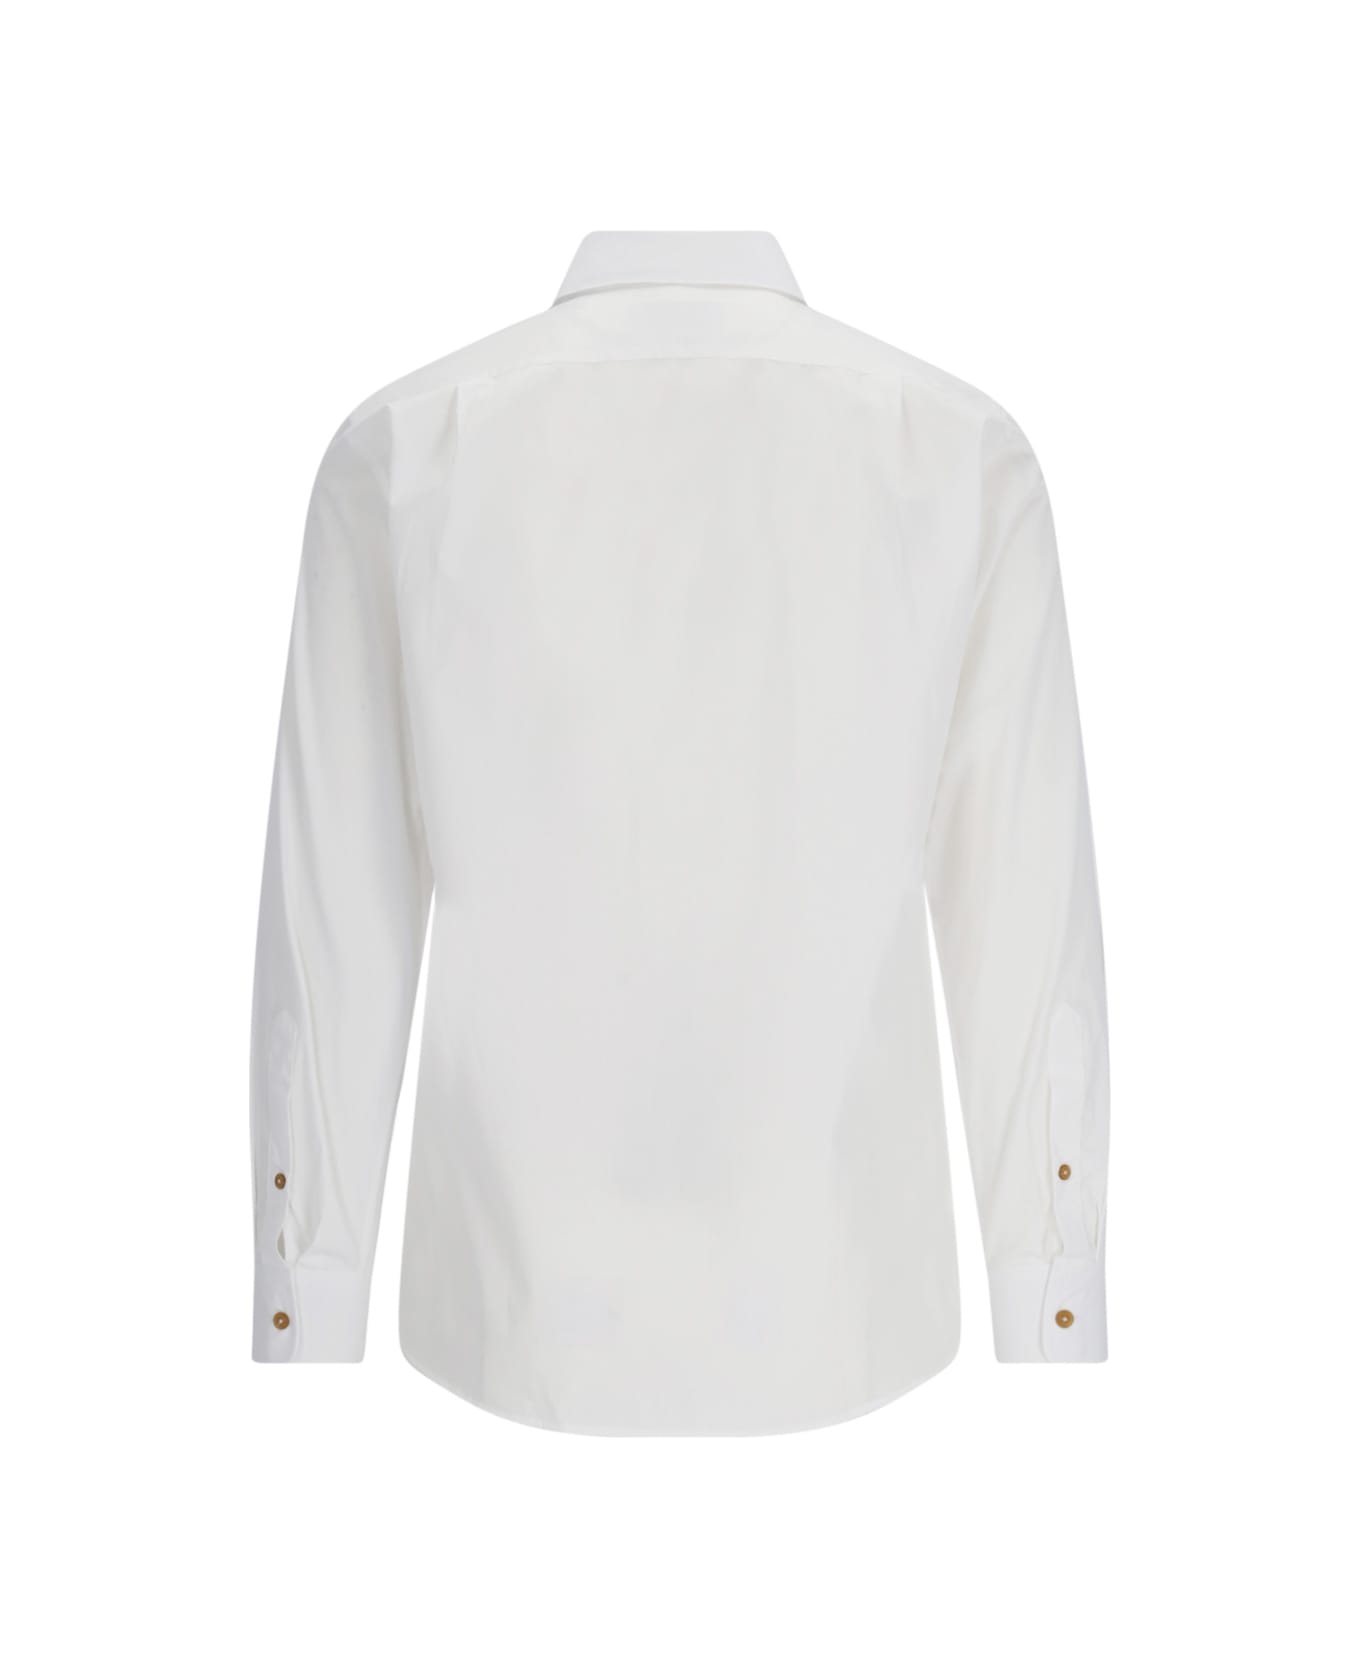 Vivienne Westwood 'two Button Krall' Shirt - White シャツ